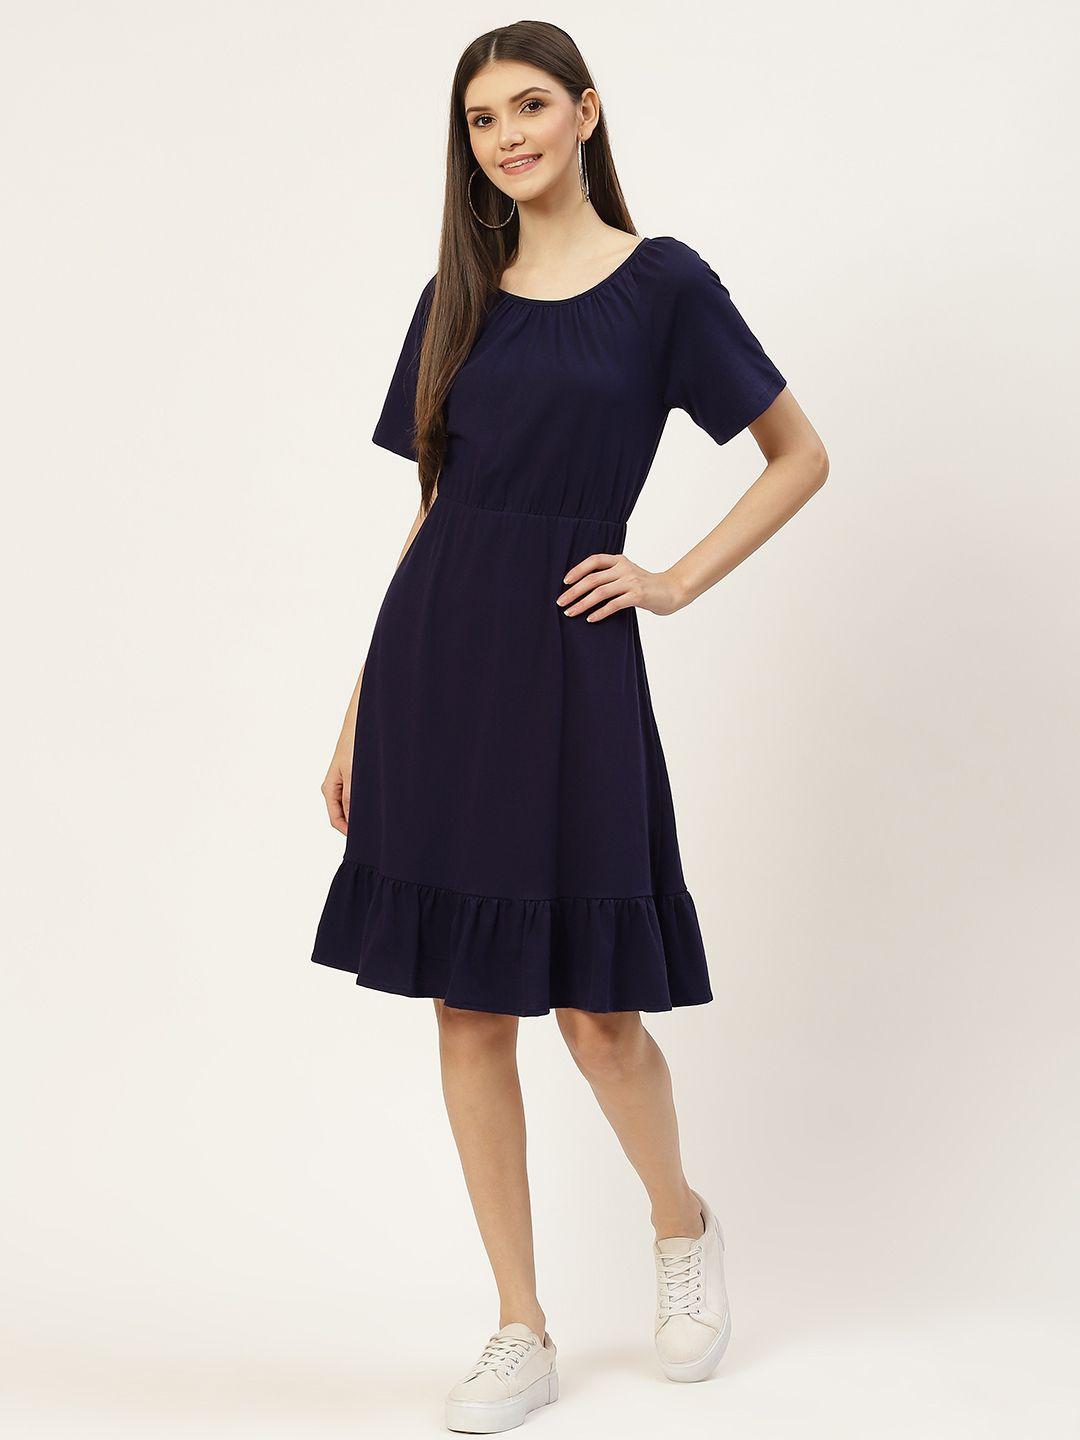 brinns navy blue solid pure cotton fit and flare midi dress